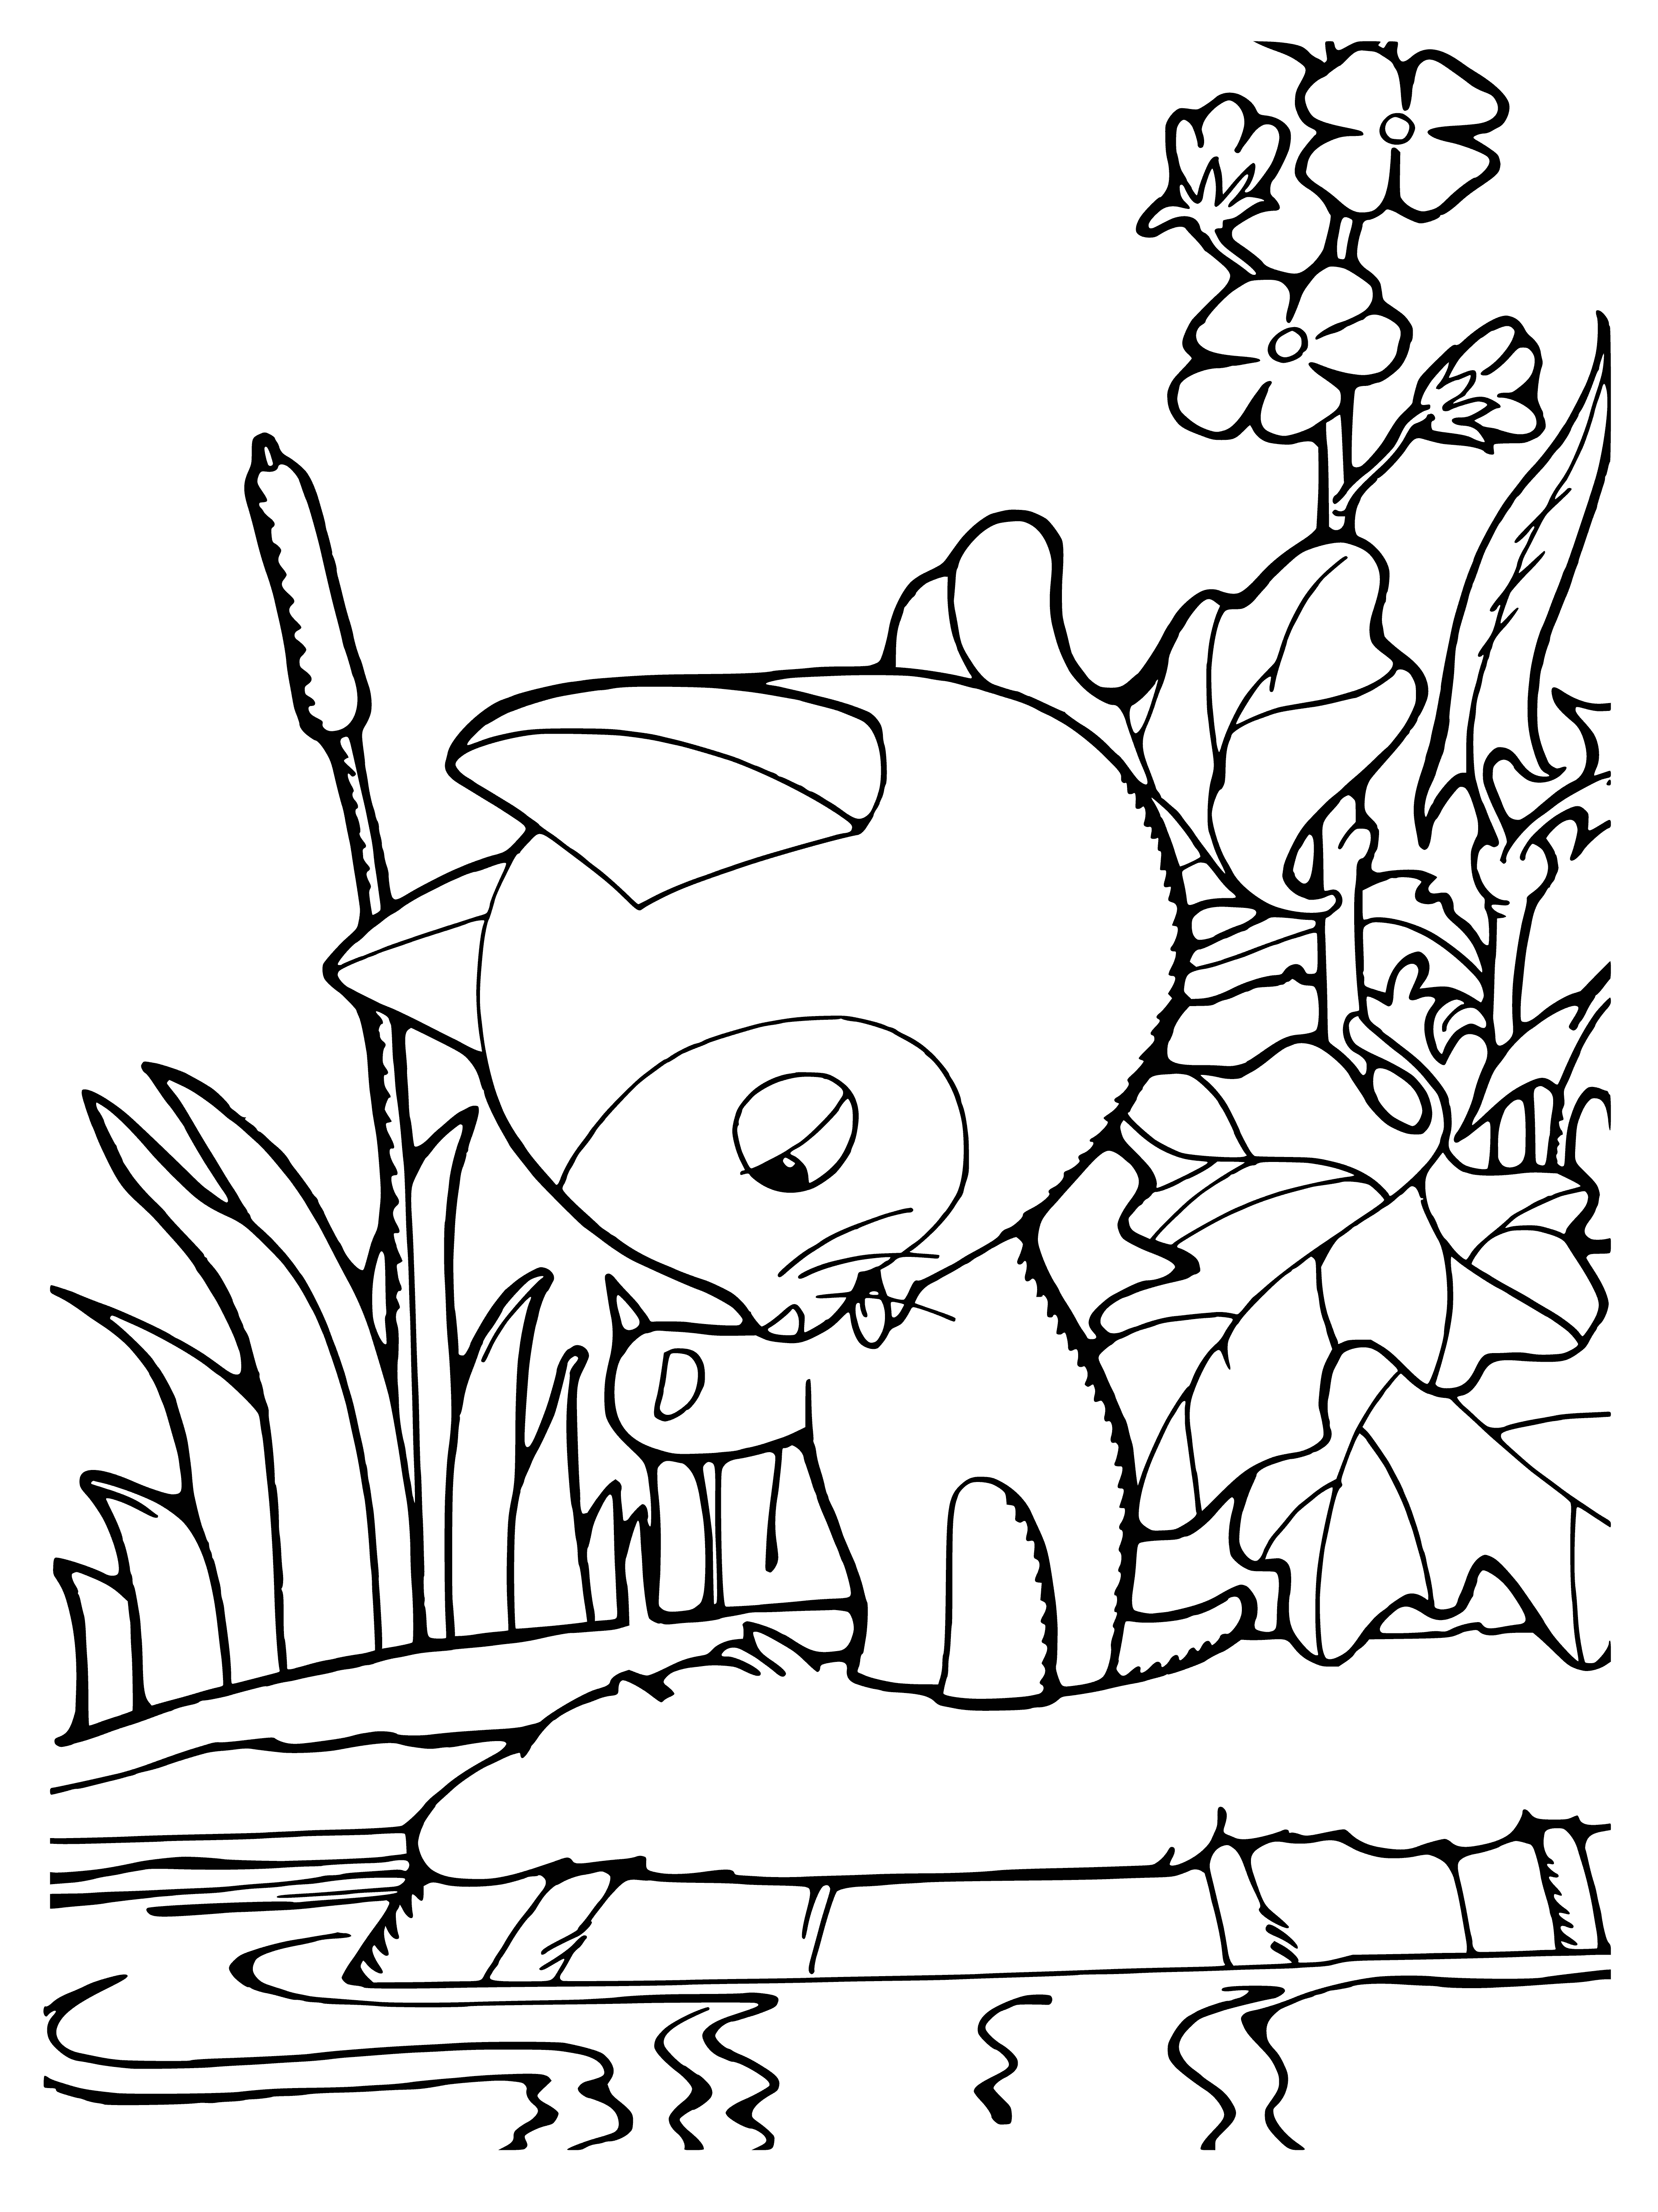 coloring page: Cute kitten Woof looks playful on a white pillow, with big brown eyes and a small brown and white body. #kitten #trending #cute